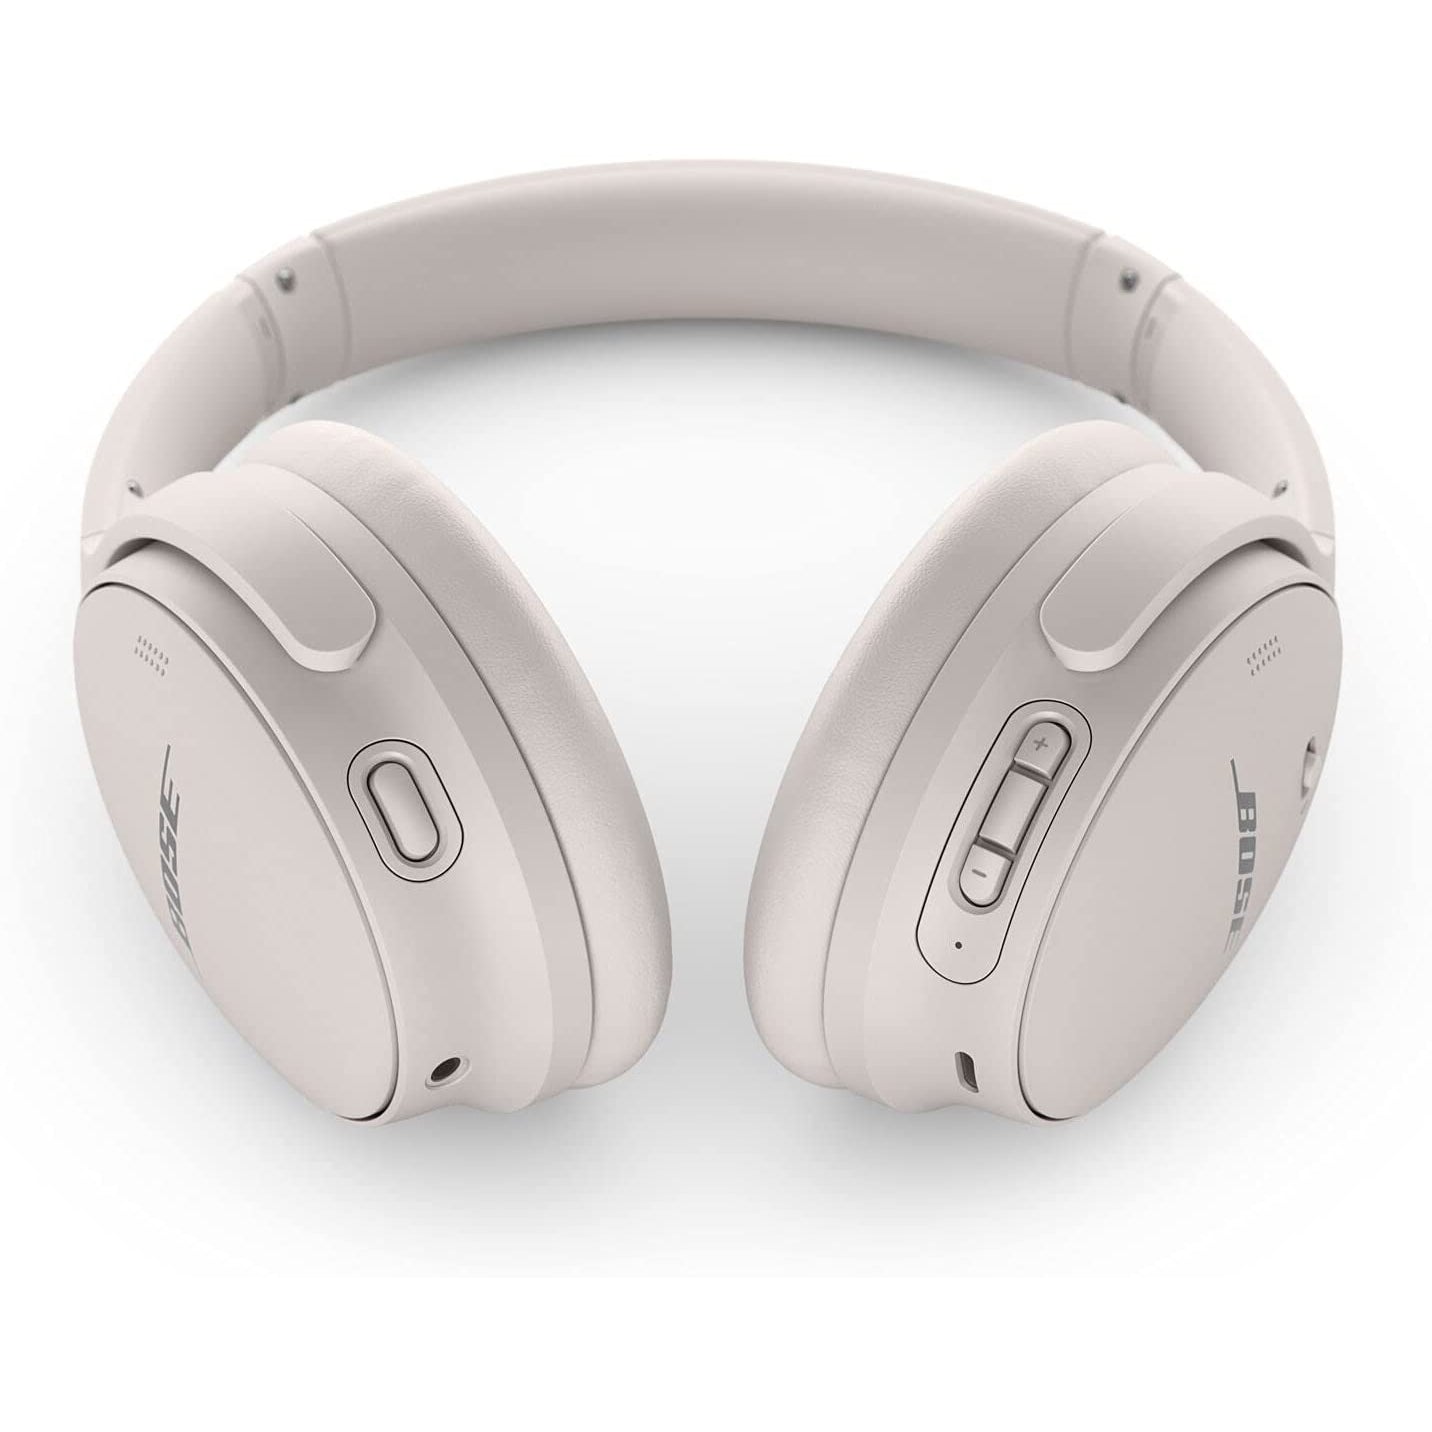 Bose Quiet Comfort 45 Bluetooth Wireless Noise Cancelling Headphones - White